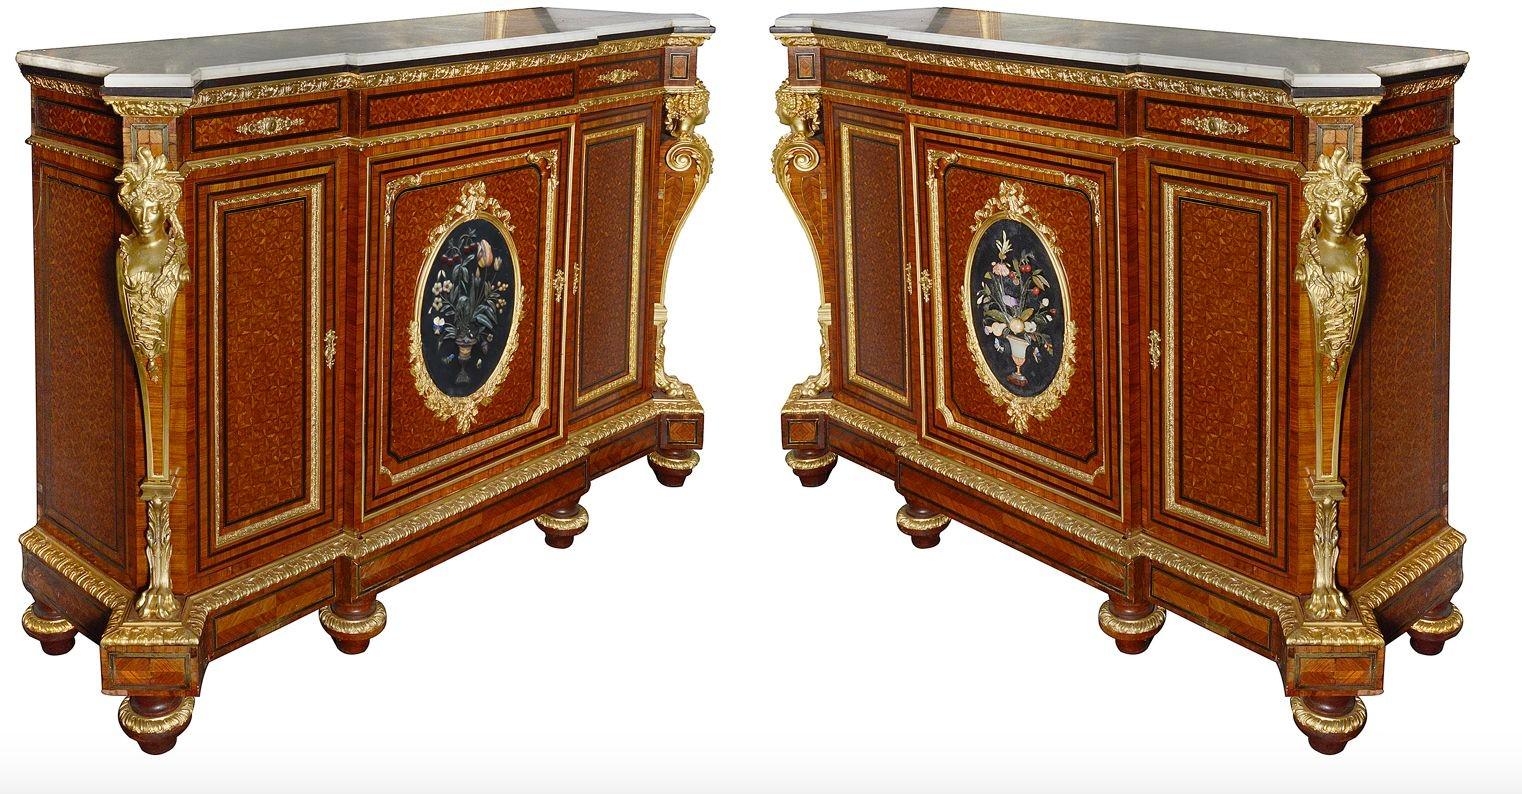 An imposing and impressive fine quality pair of French 19th Century marble topped side cabinets. Each with wonderful gilded ormolu mouldings, mounts and monopodia embellishments to the corners. Parquetry veneers to the three inset panelled doors and